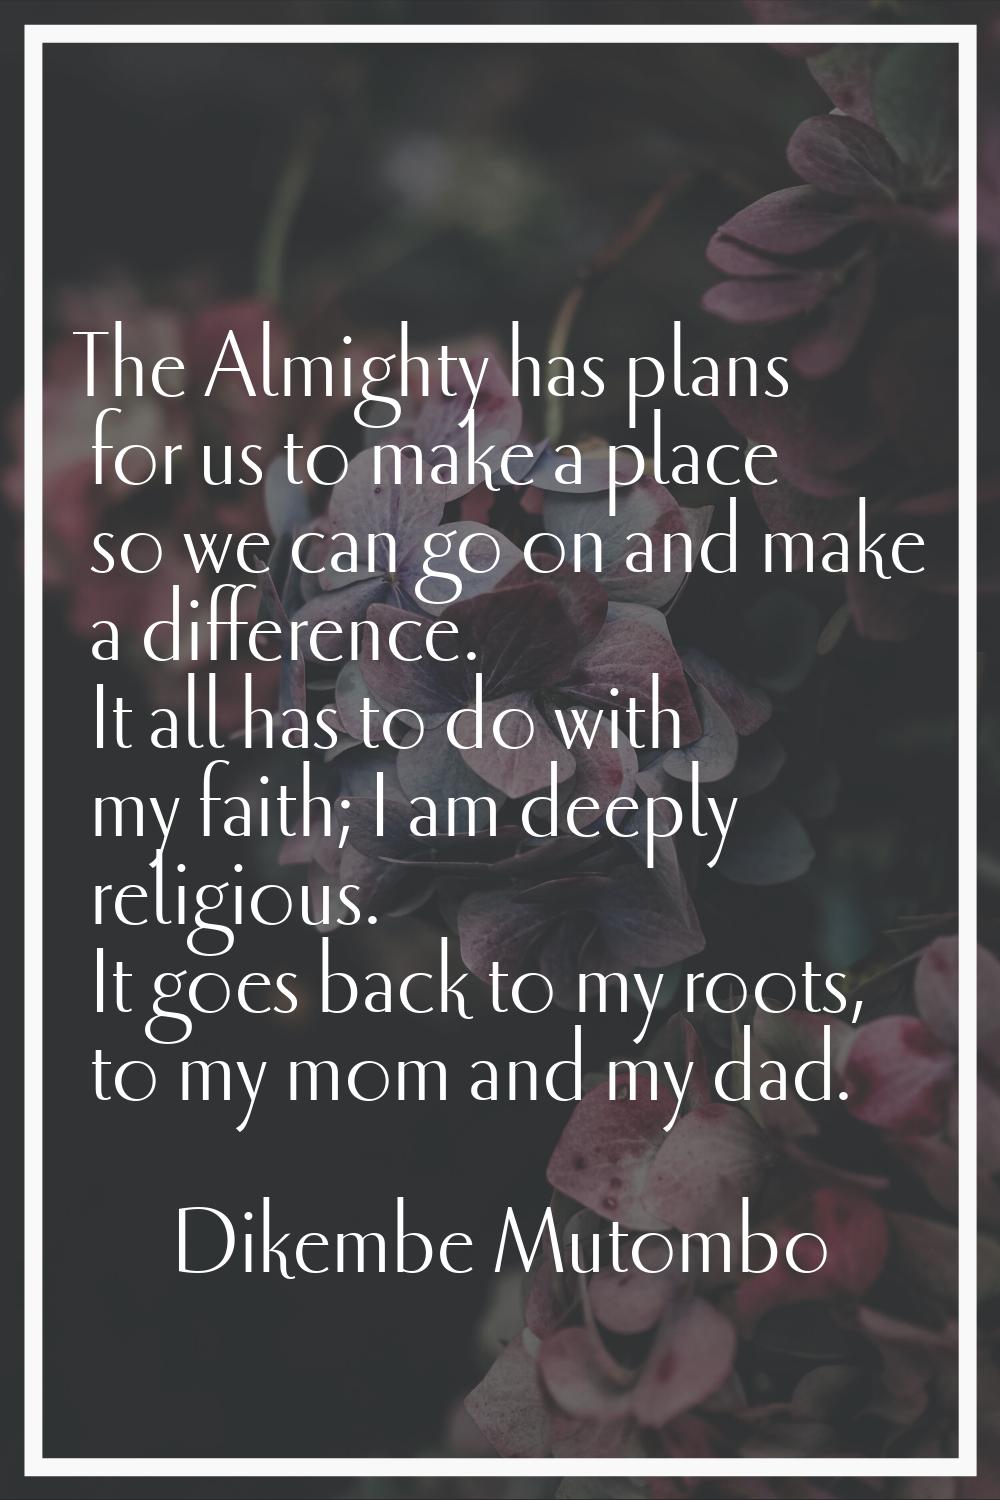 The Almighty has plans for us to make a place so we can go on and make a difference. It all has to 